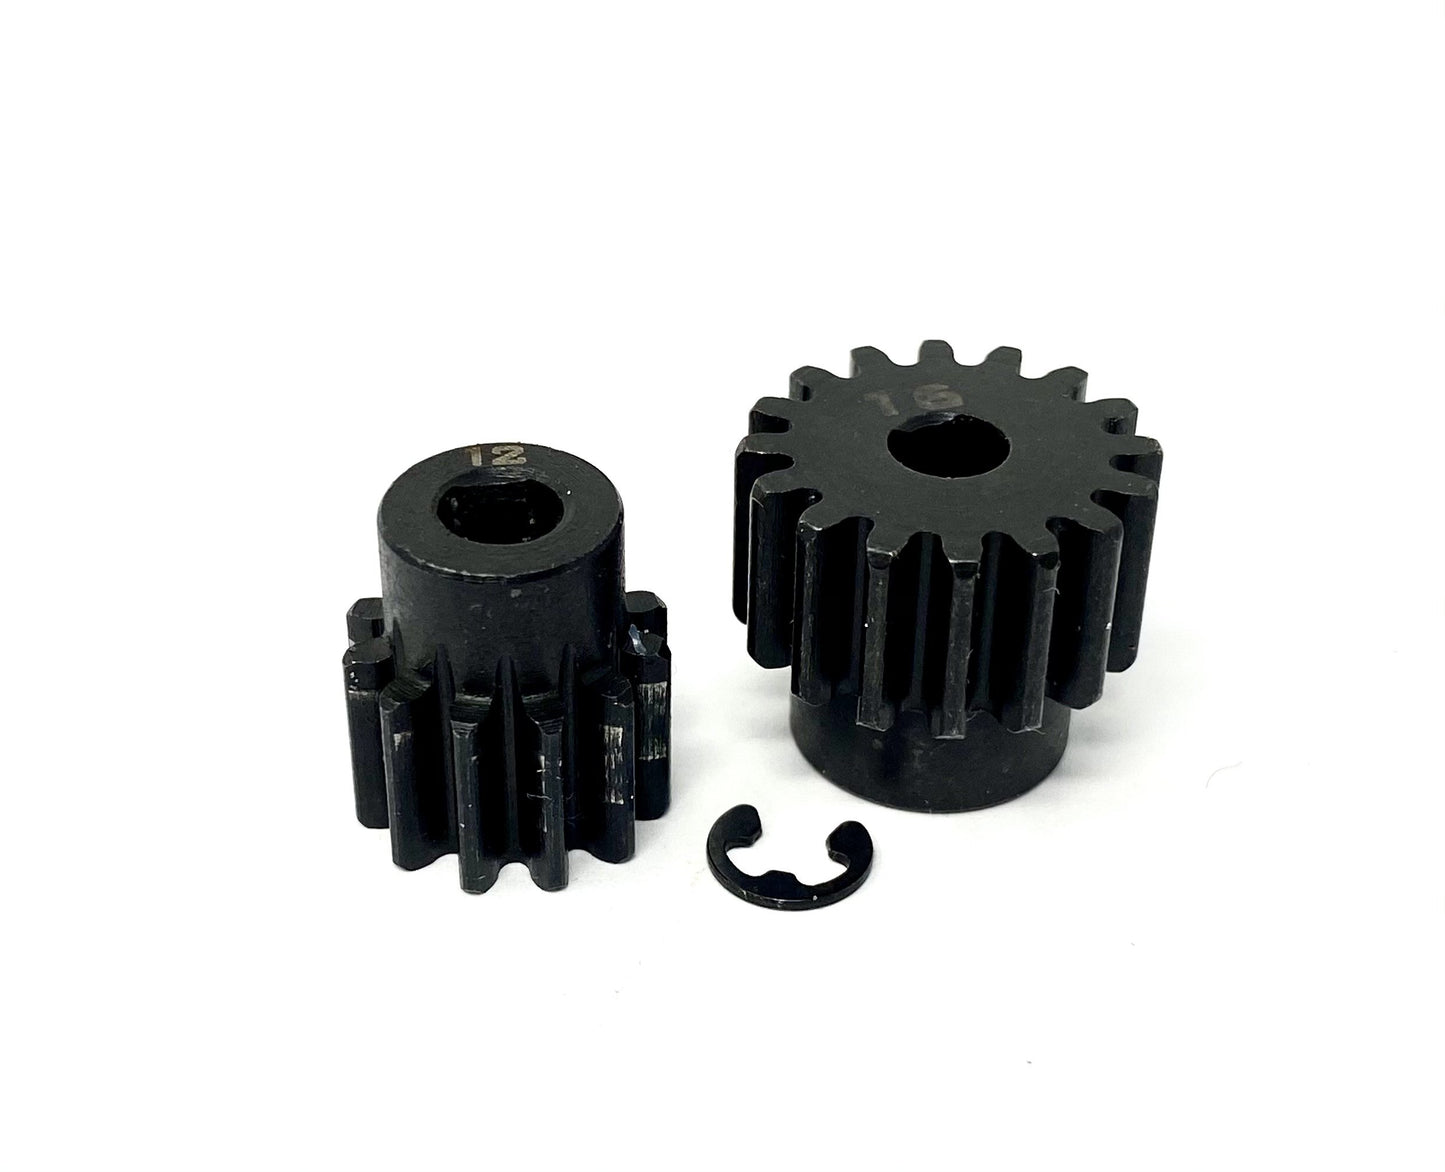 Arrma NOTORIOUS 6s v5 BLX - Pinion Gears (12t 16t steel Mod 1 5mm outcast ARA8611v5 - Dirt Cheap RC SAVING YOU MONEY, ONE PART AT A TIME